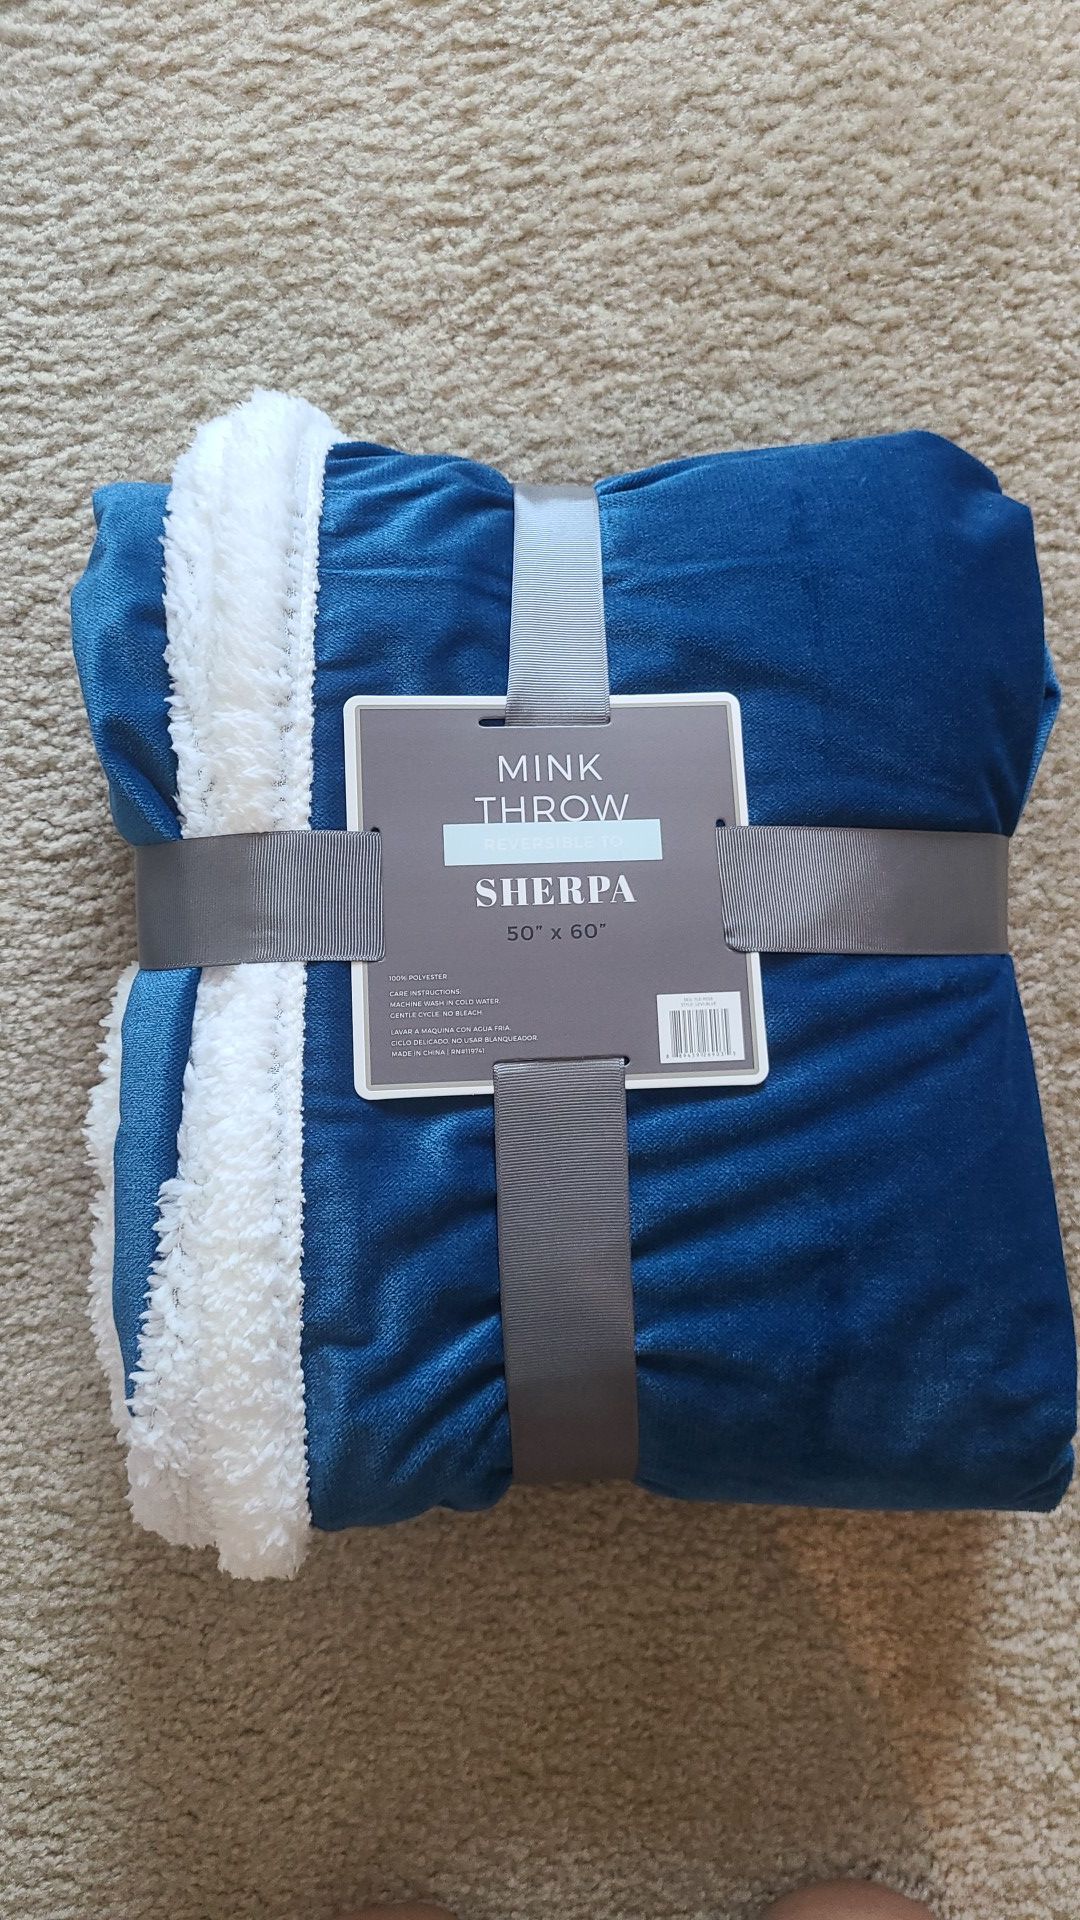 Throw blanket, reversible, 50"x60" blue and white